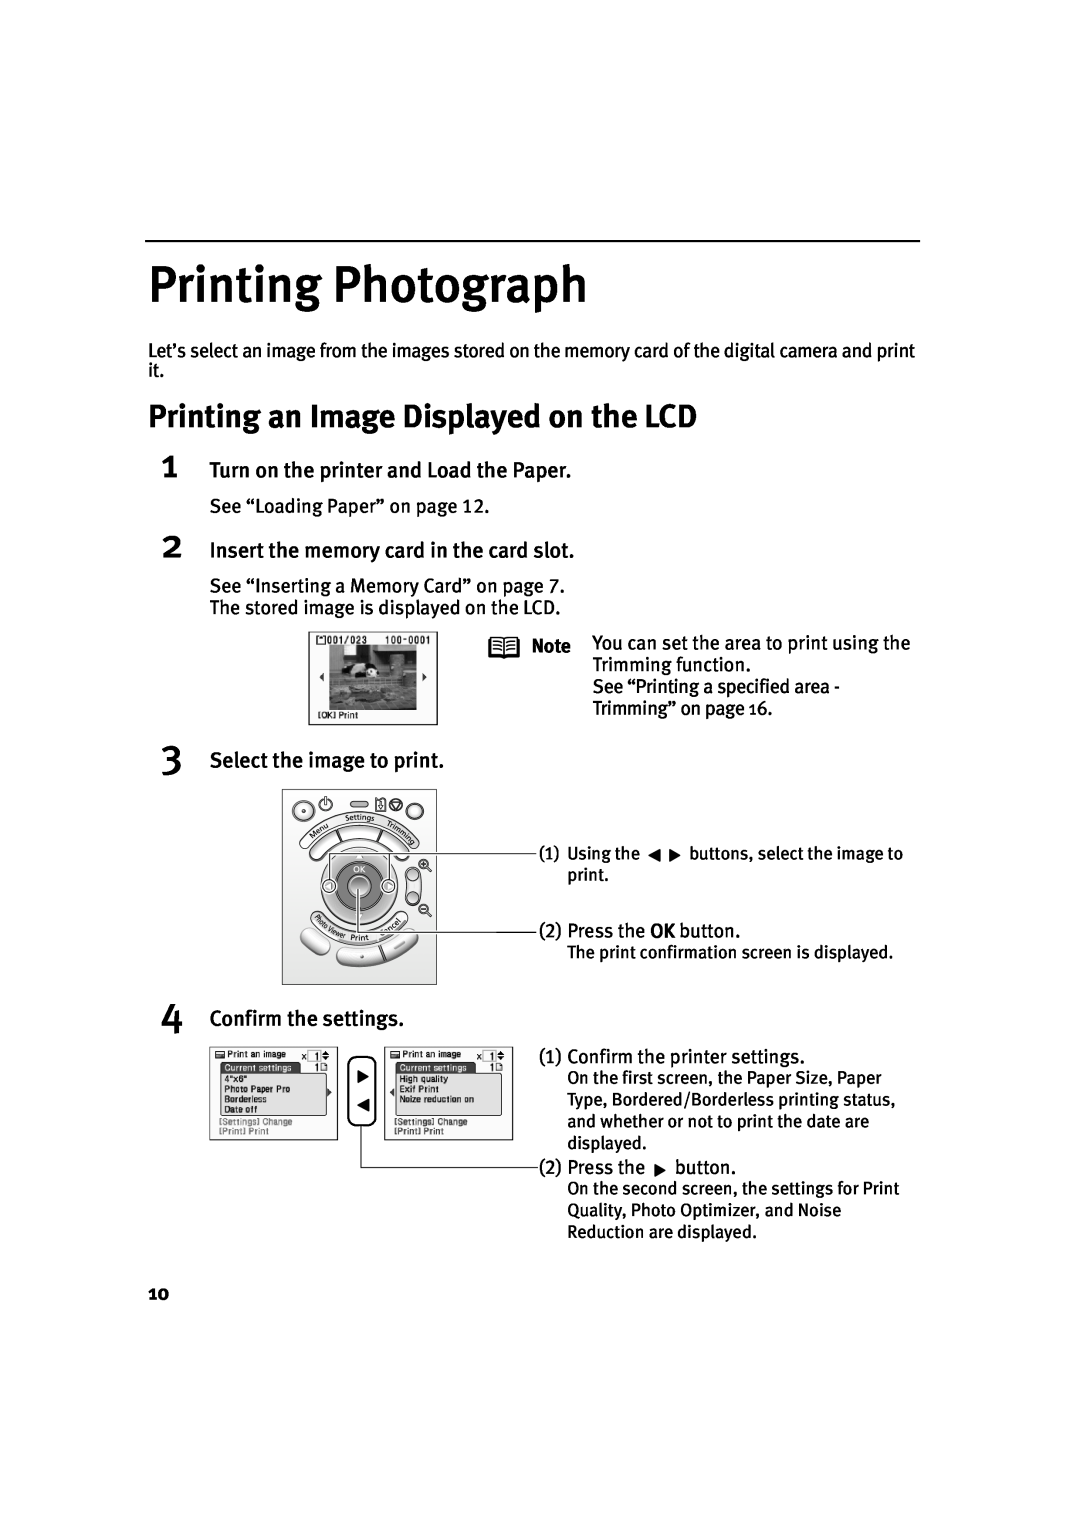 Canon 900D manual Printing Photograph, Printing an Image Displayed on the LCD, Turn on the printer and Load the Paper 